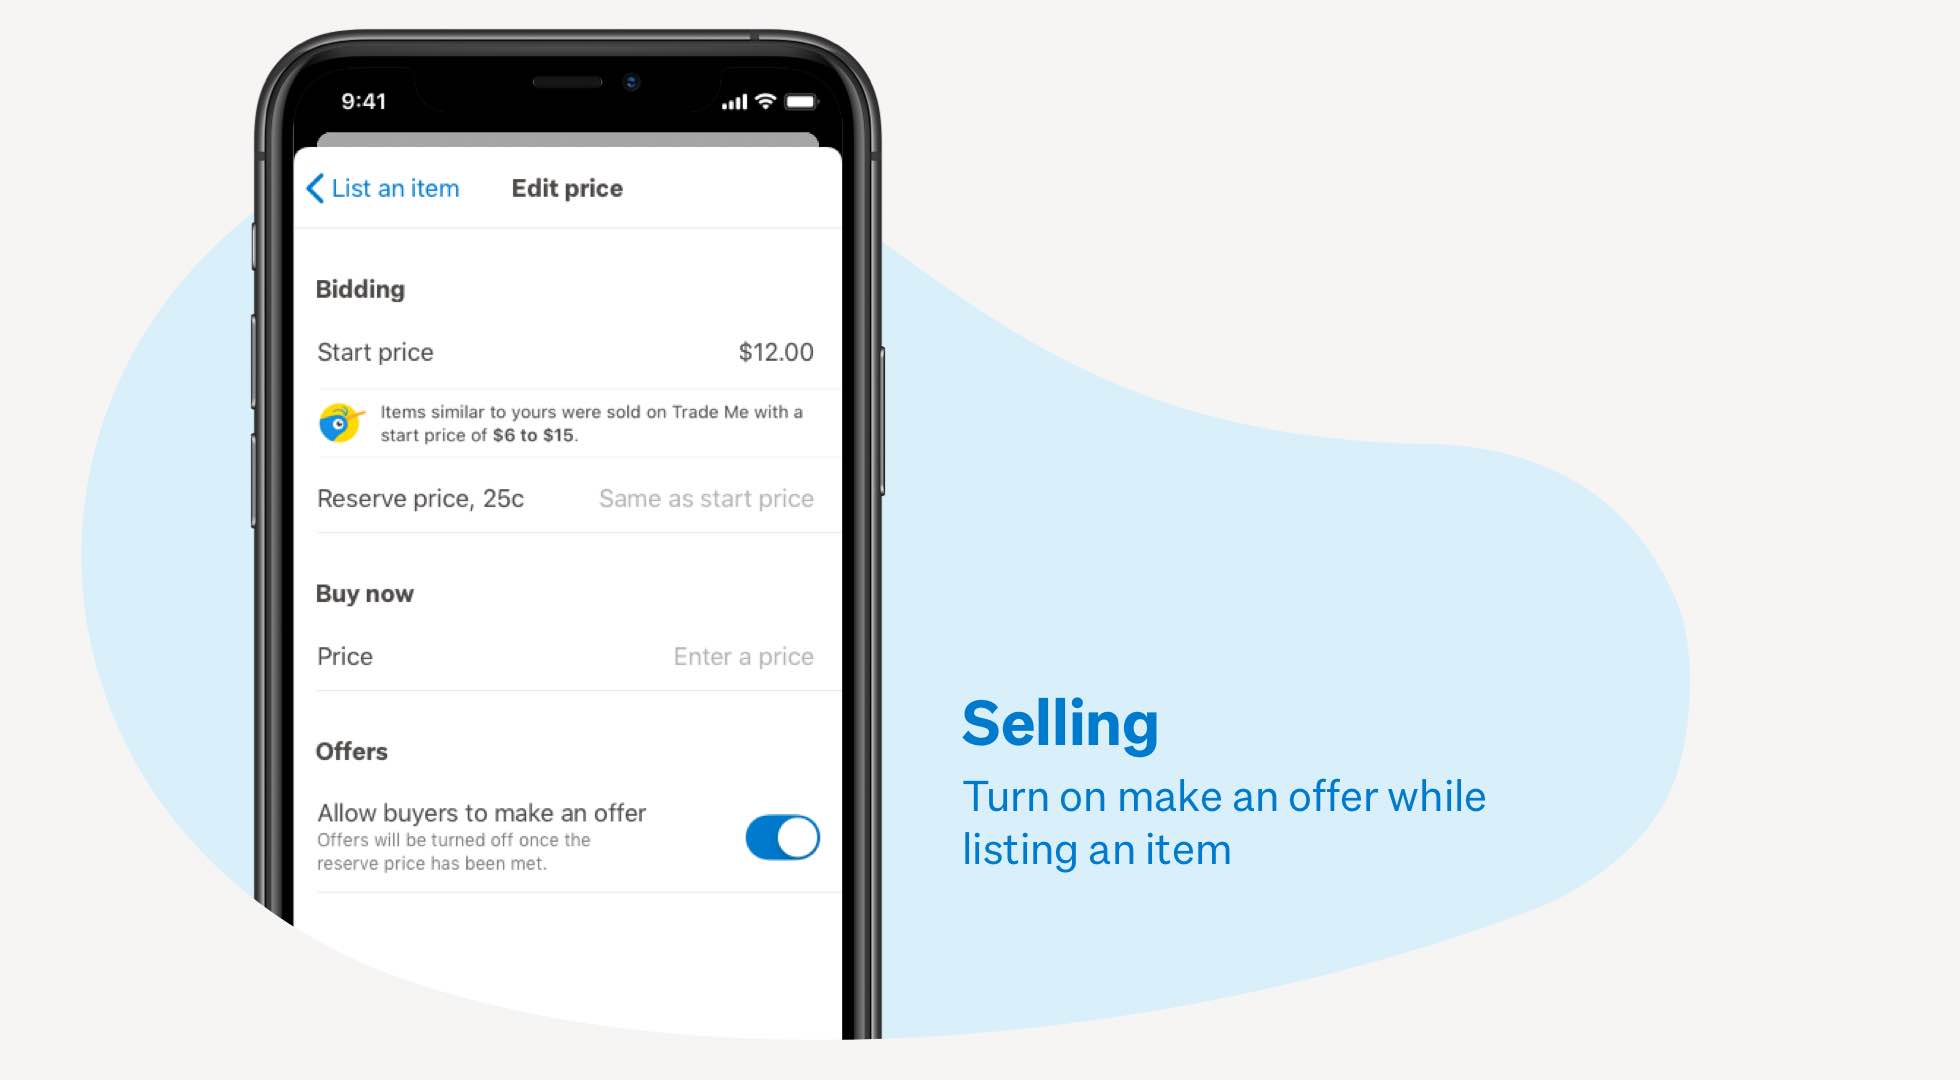 A smartphone, showing the option to 'Allow buyers to make an offer' during the listing process in the app.